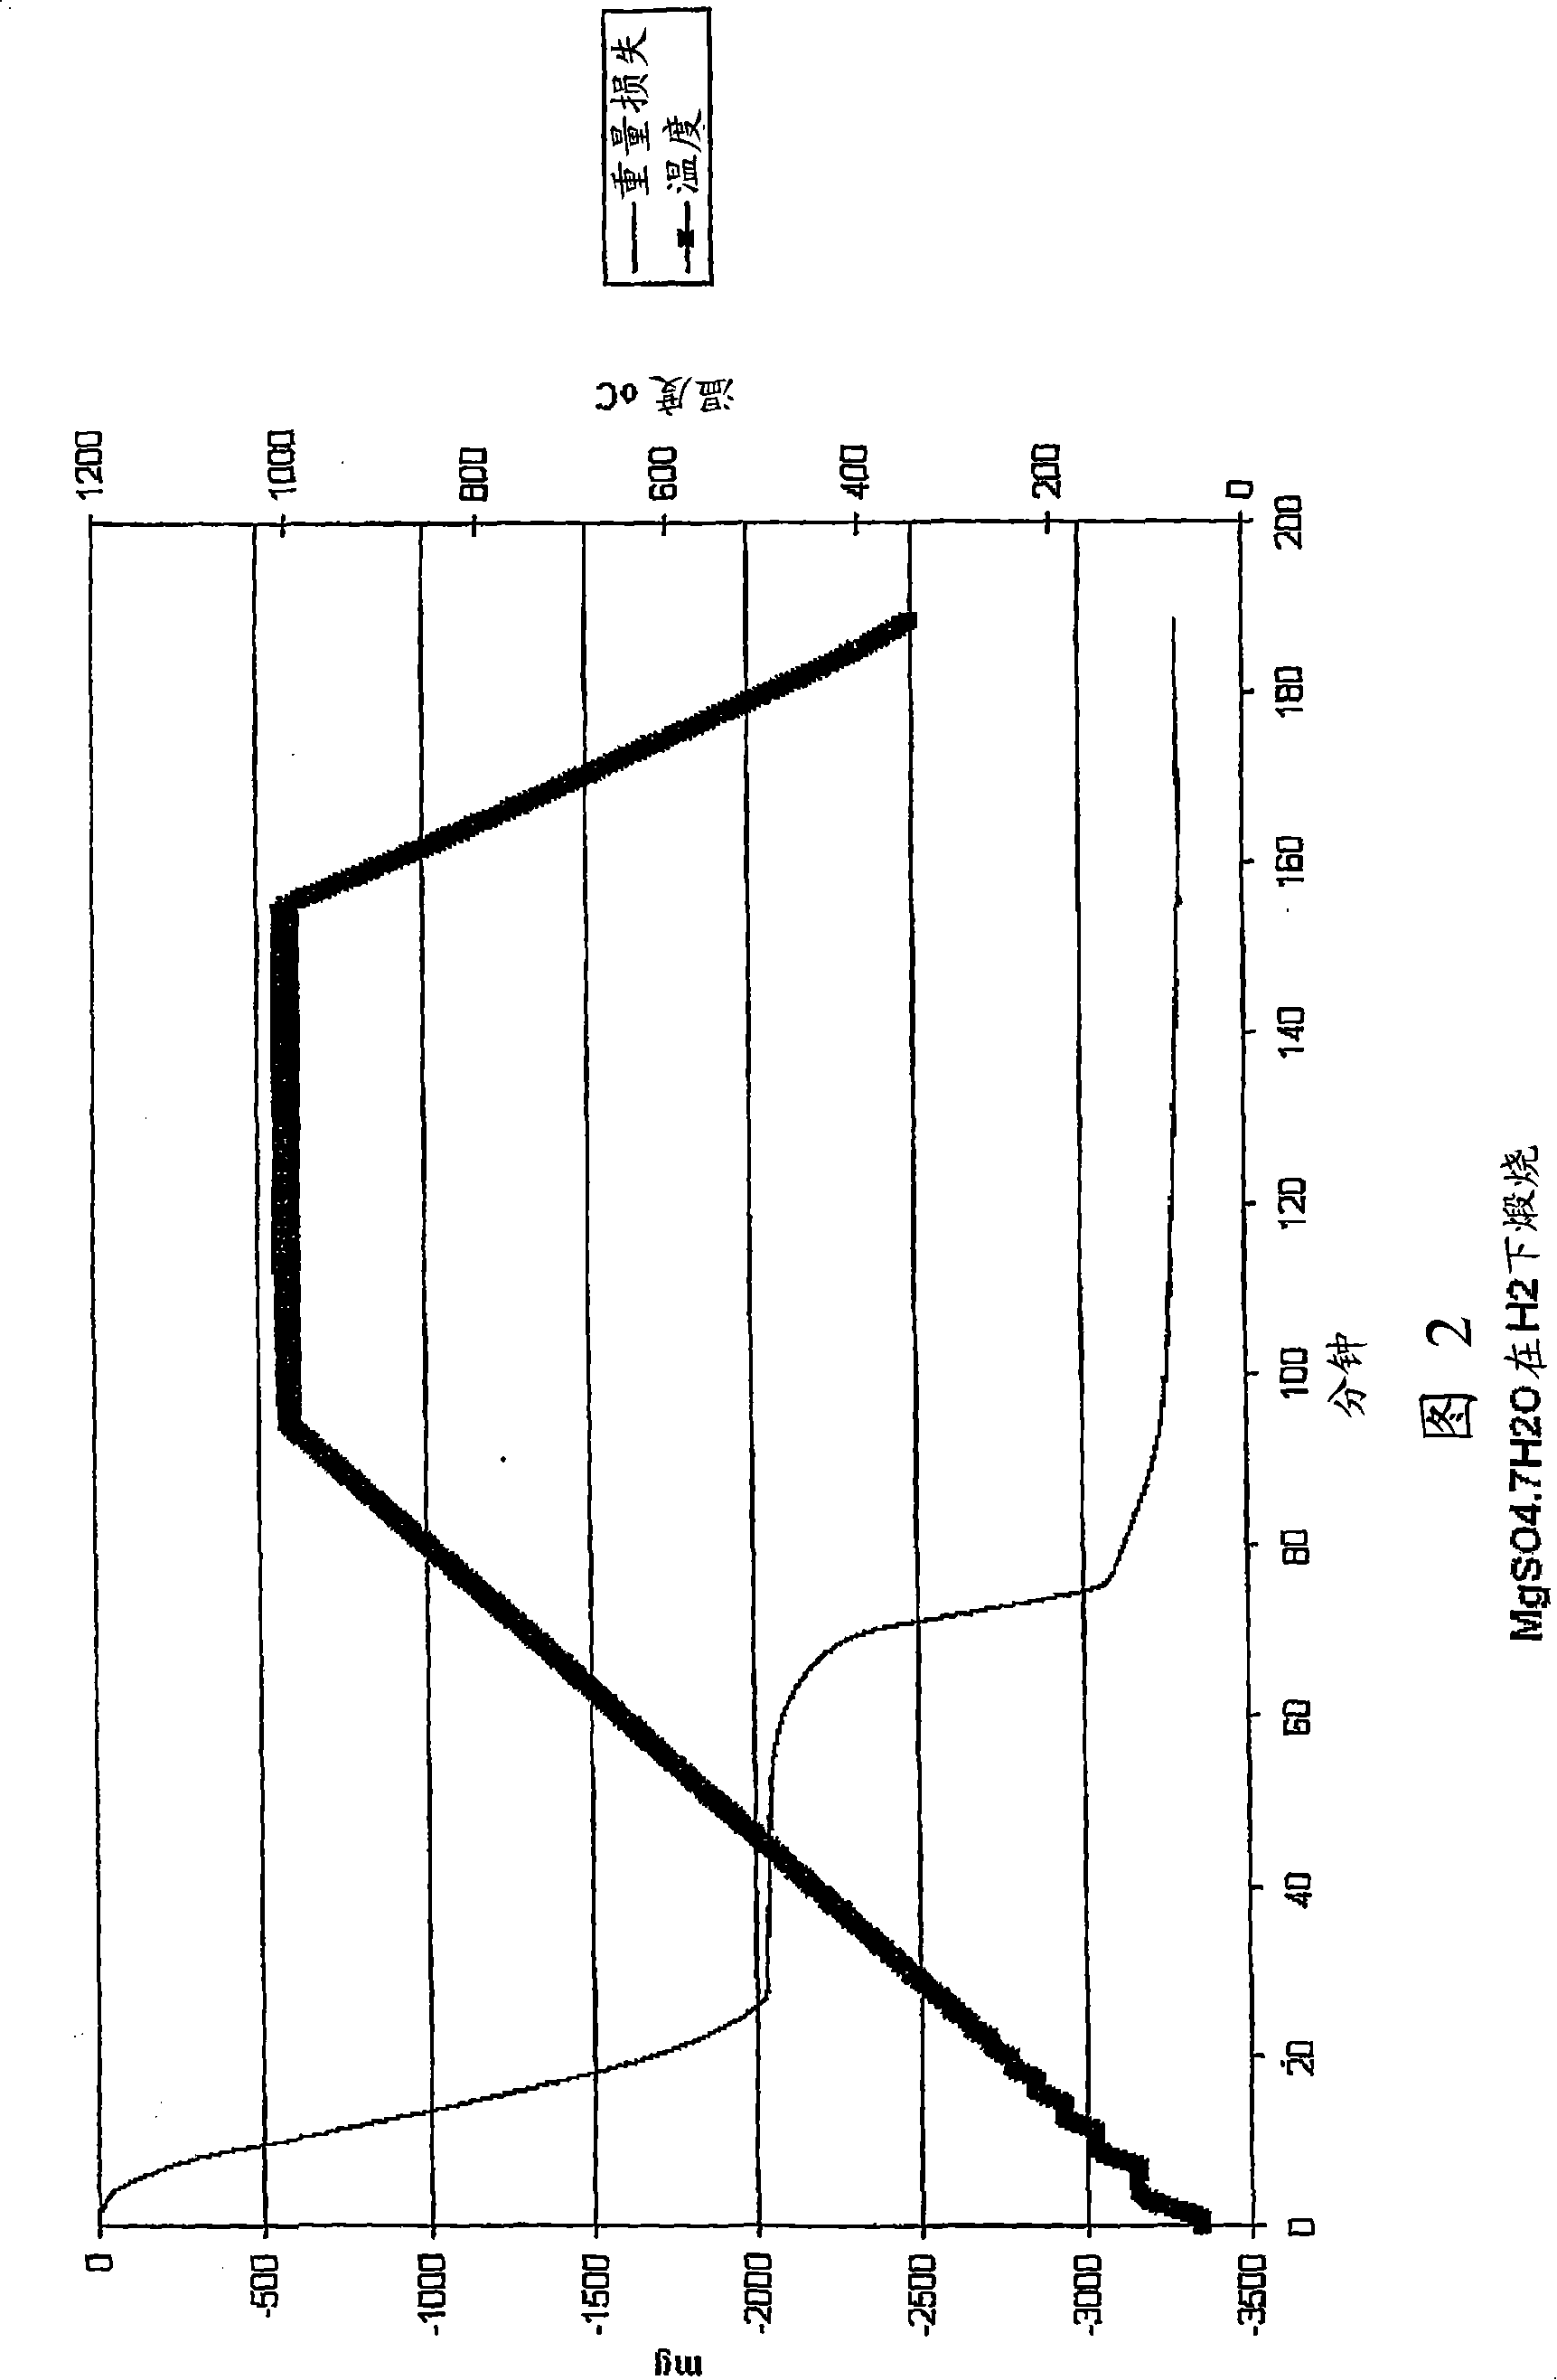 Method for atmospheric digestion of laterite ore